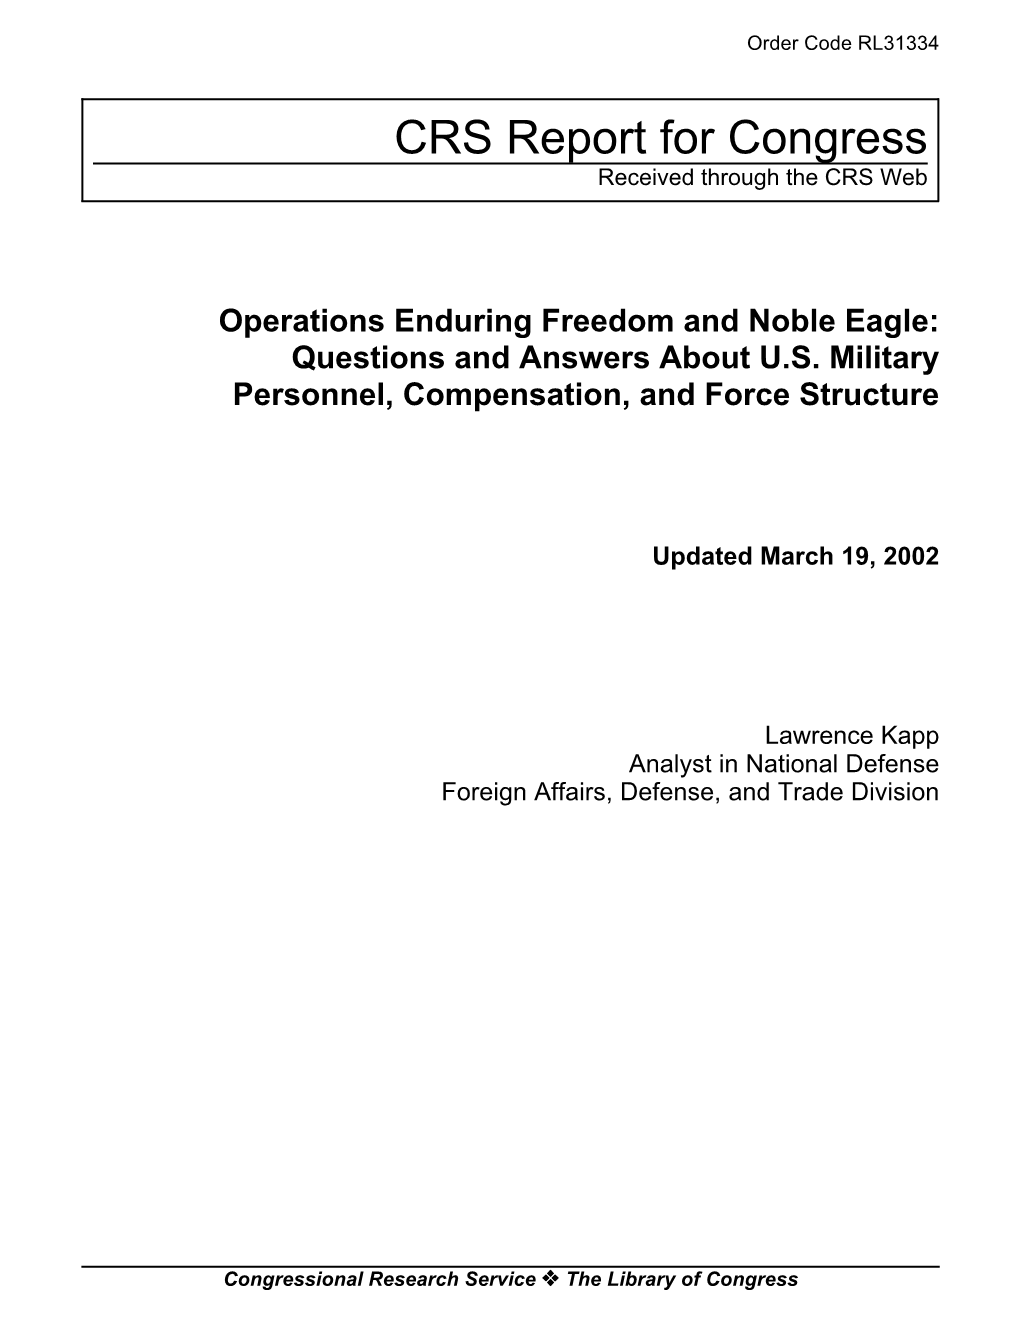 Operations Enduring Freedom and Noble Eagle: Questions and Answers About U.S